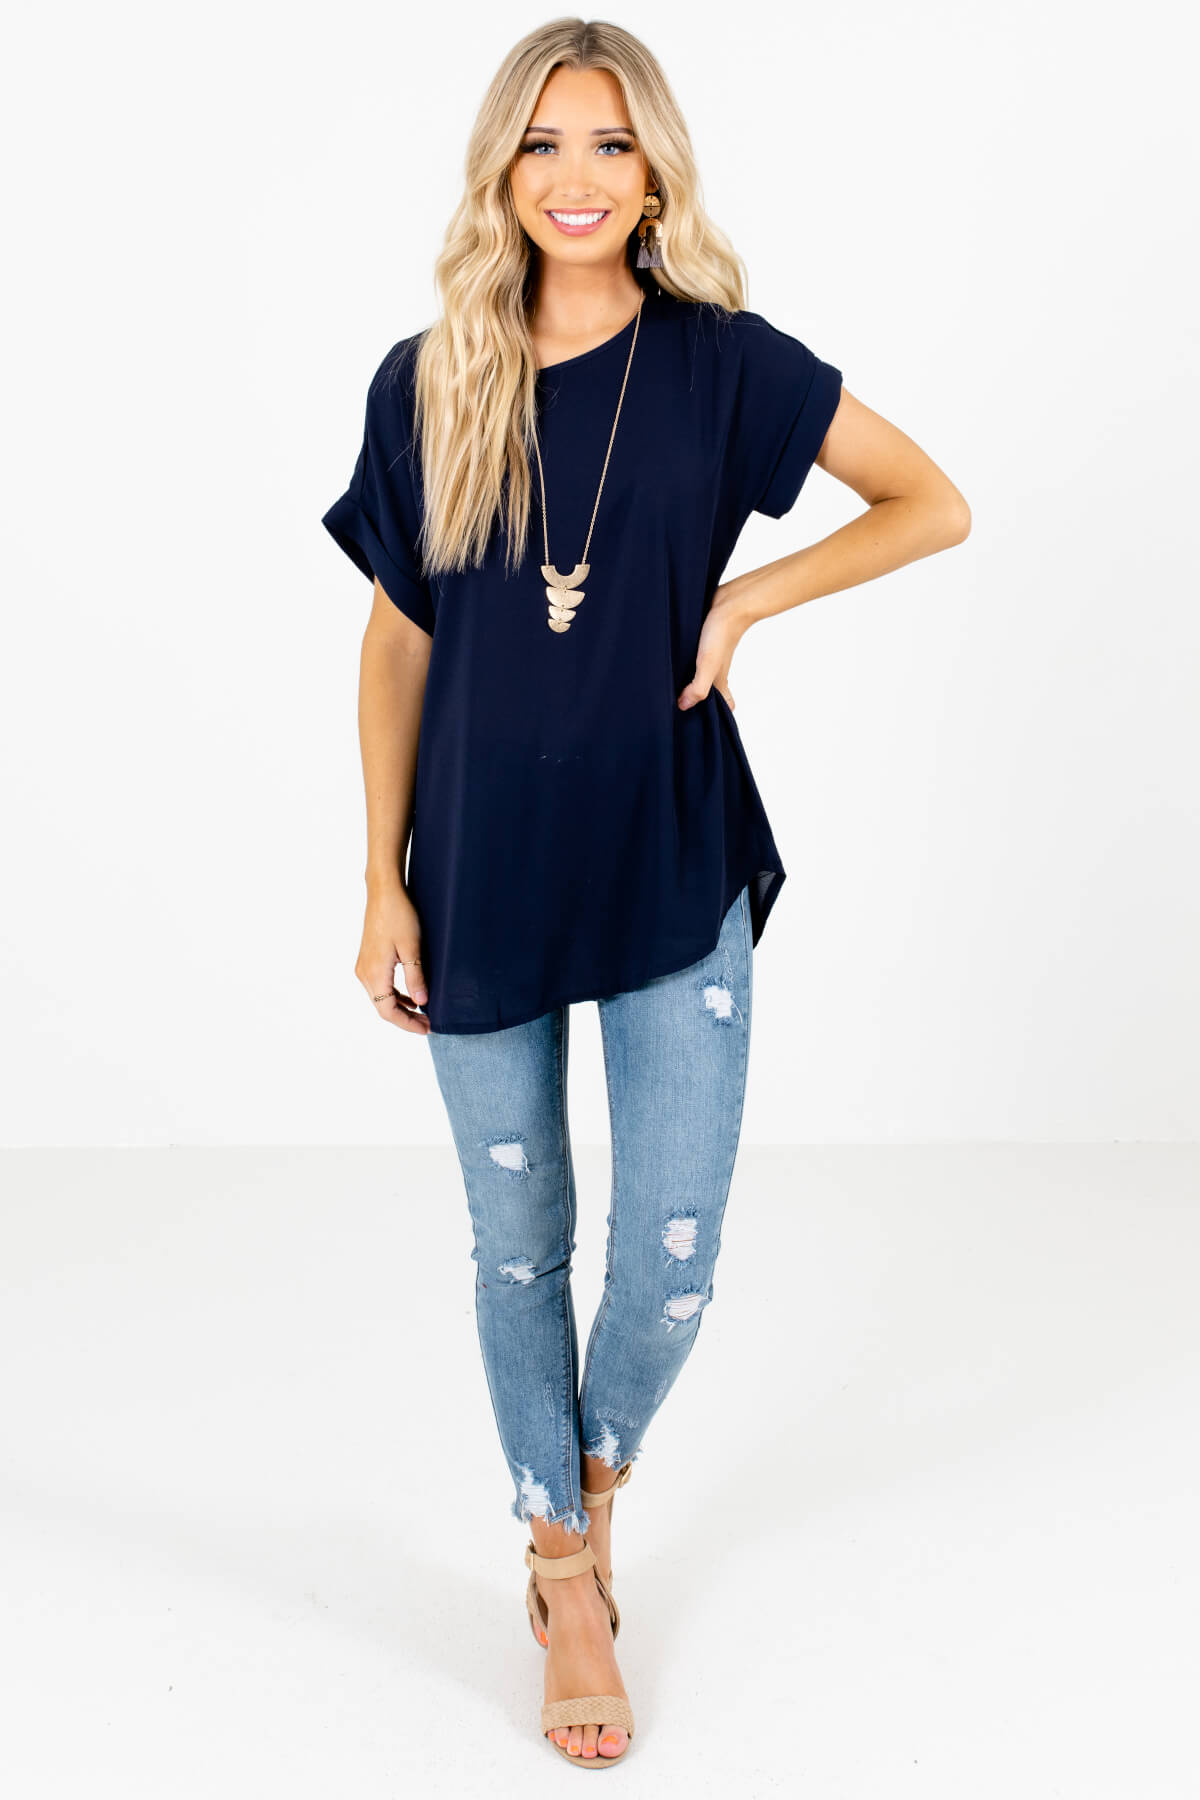 Women’s Navy Blue Fall and Winter Boutique Clothing